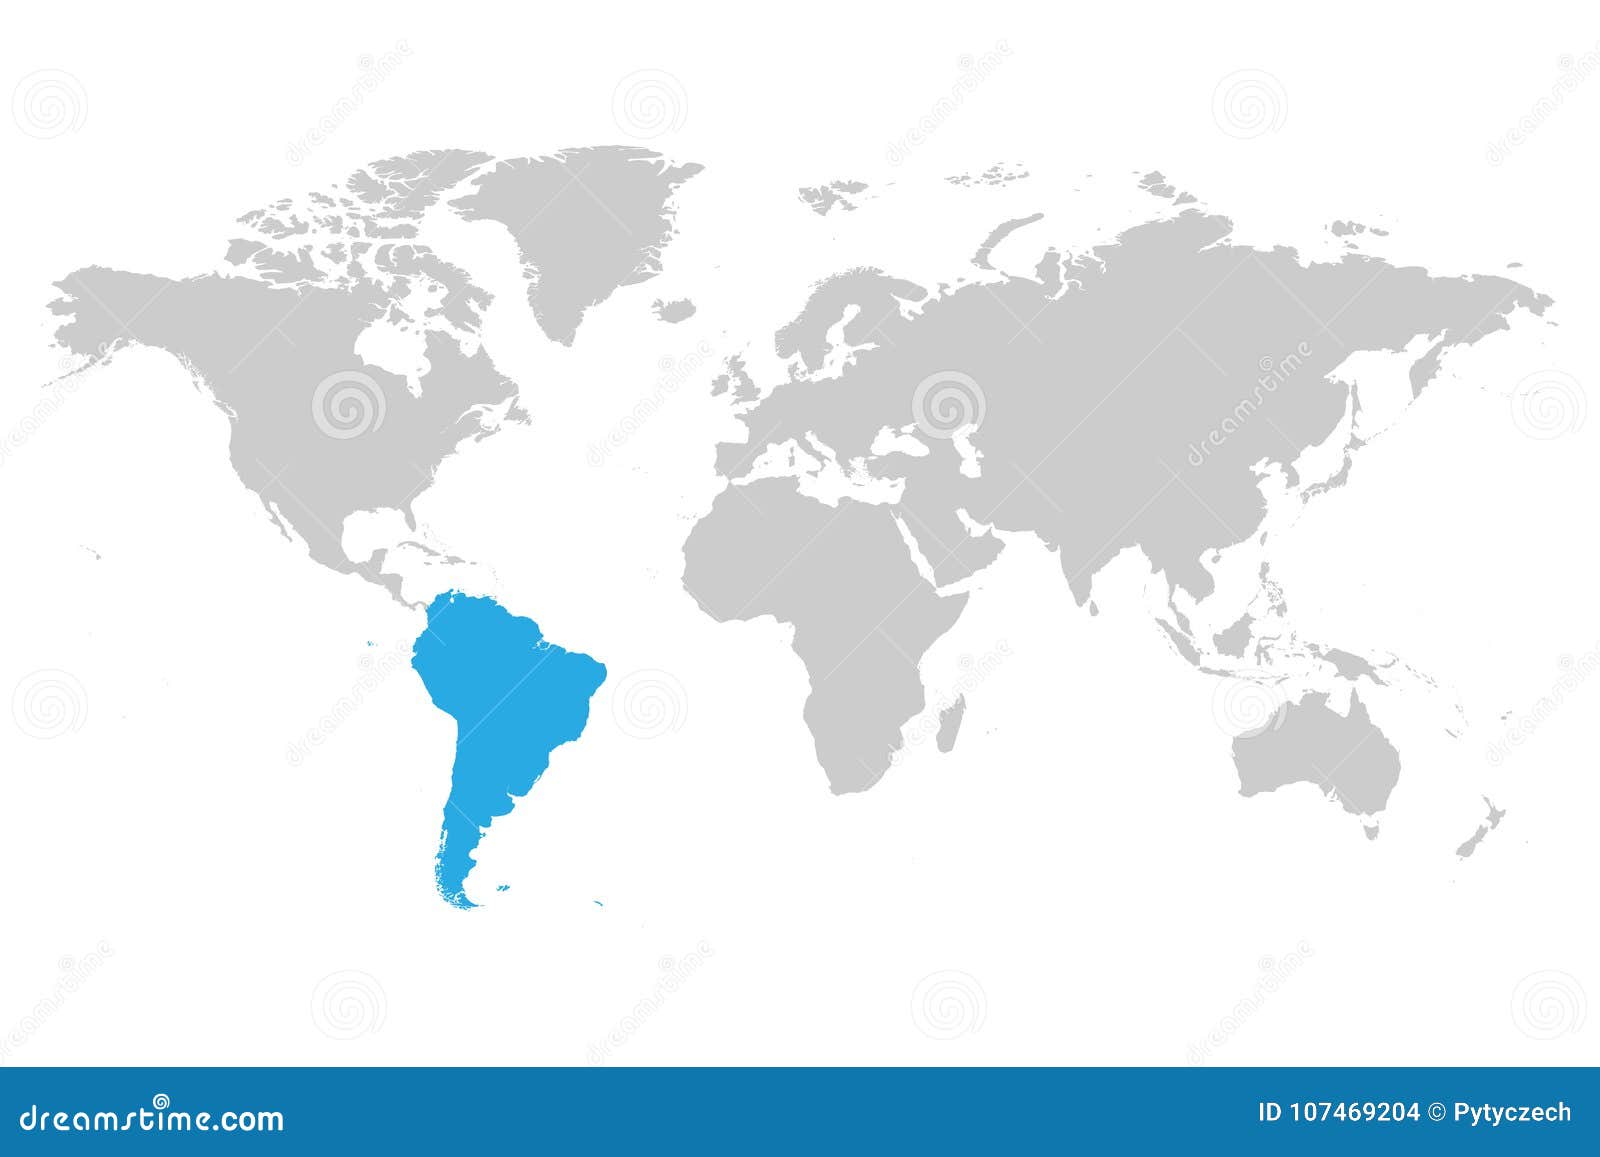 south america continent blue marked in grey silhouette of world map. simple flat  